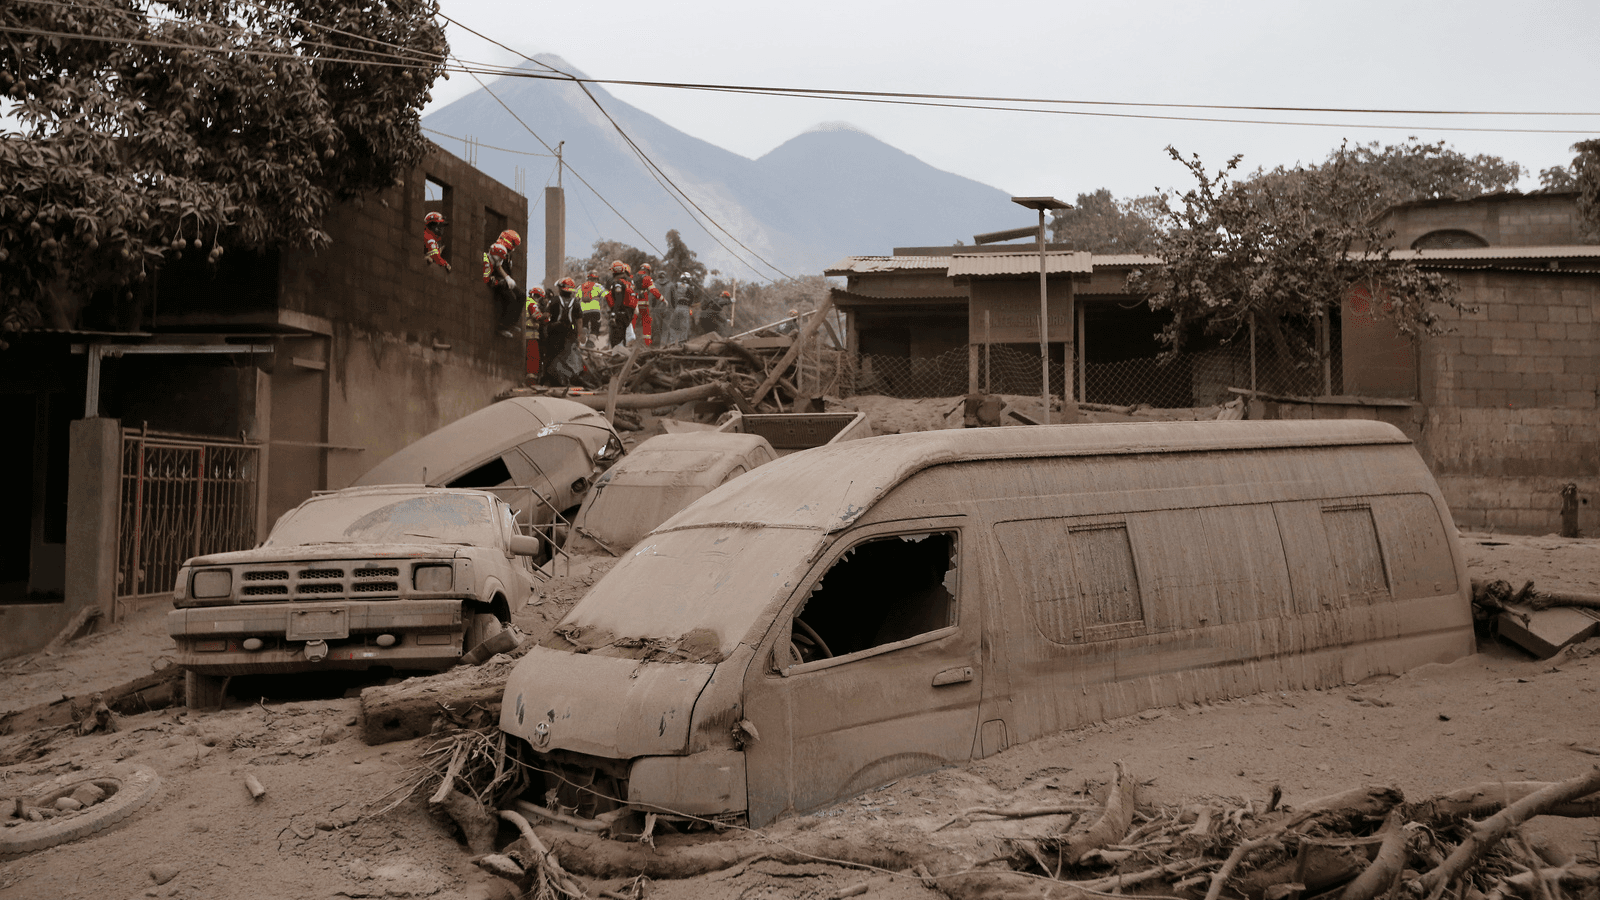 Rescue workers search for survivors and victims in the aftermath of Fuego volcano's eruption